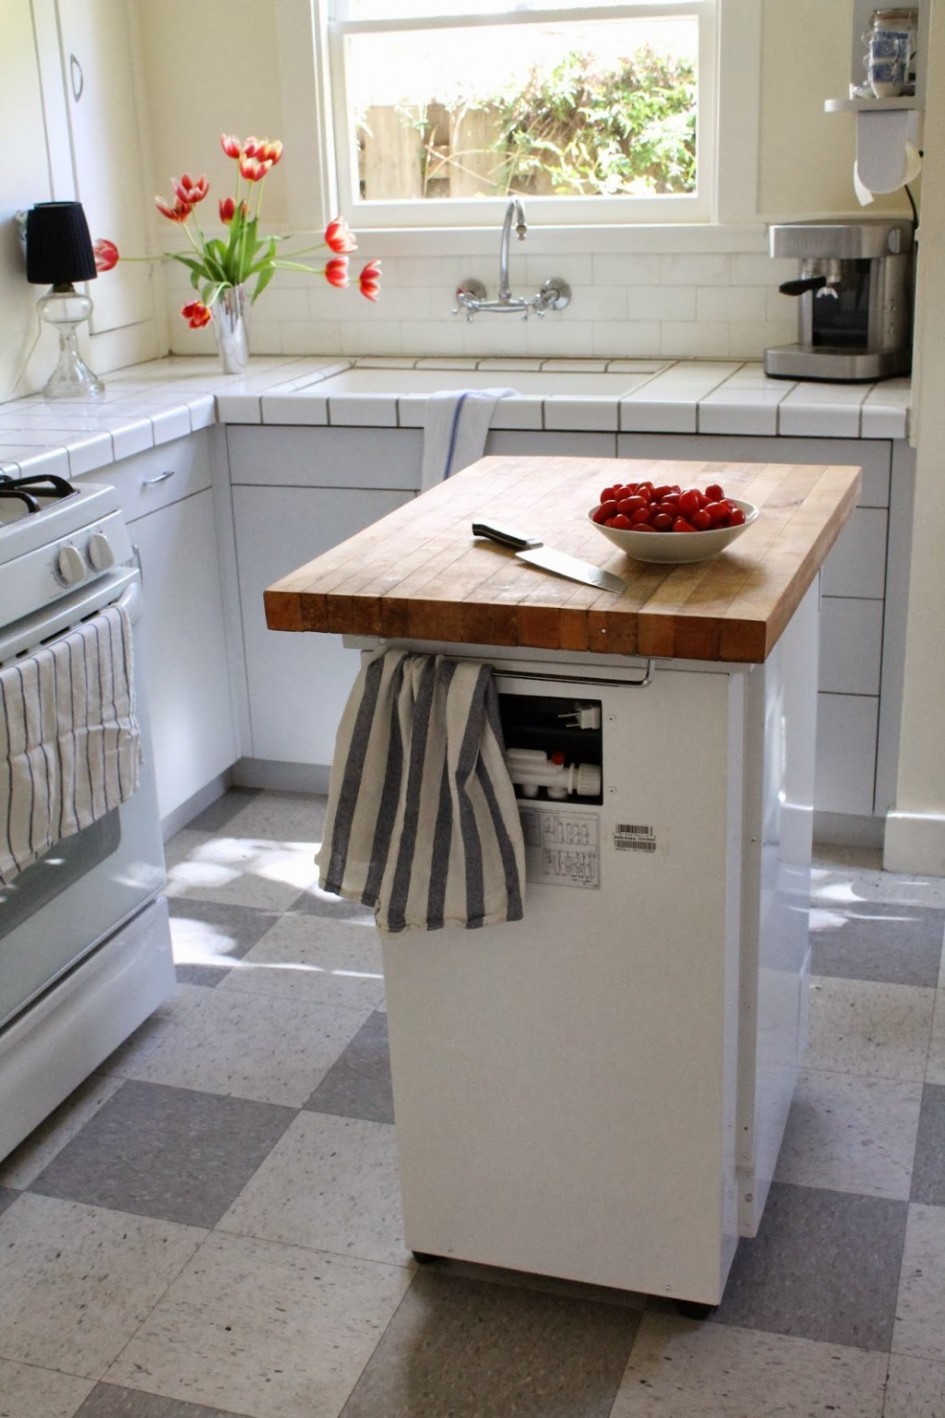 5 Inexpensive Ways to Make Your Small Kitchen More Functional